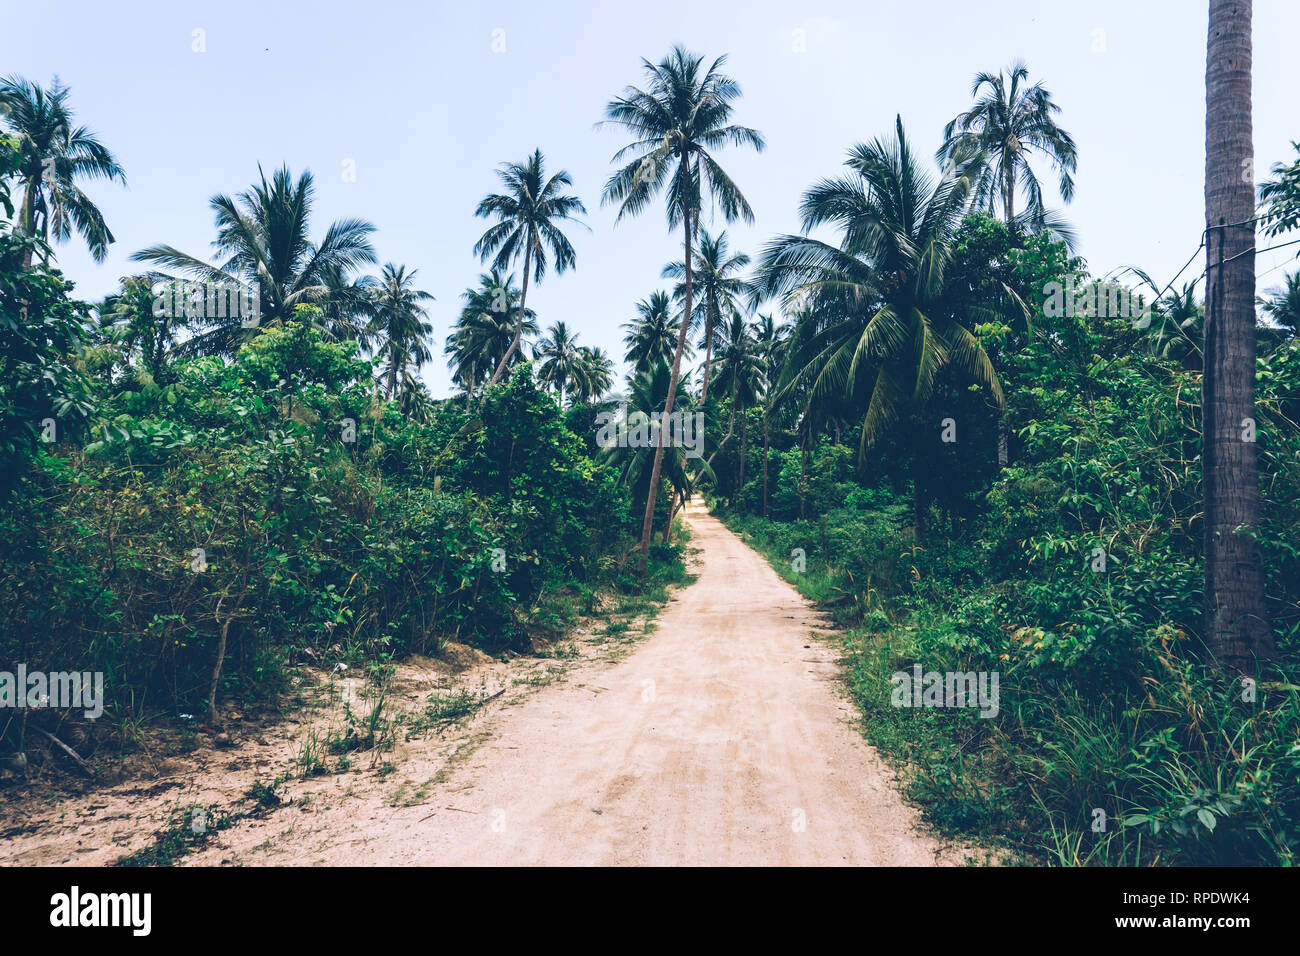 Tropical jungle. Dirt road in the jungle. Thailand, Southeast Asia. Tropical rainforest. Banana palm trees. Landscape view. Stock Photo